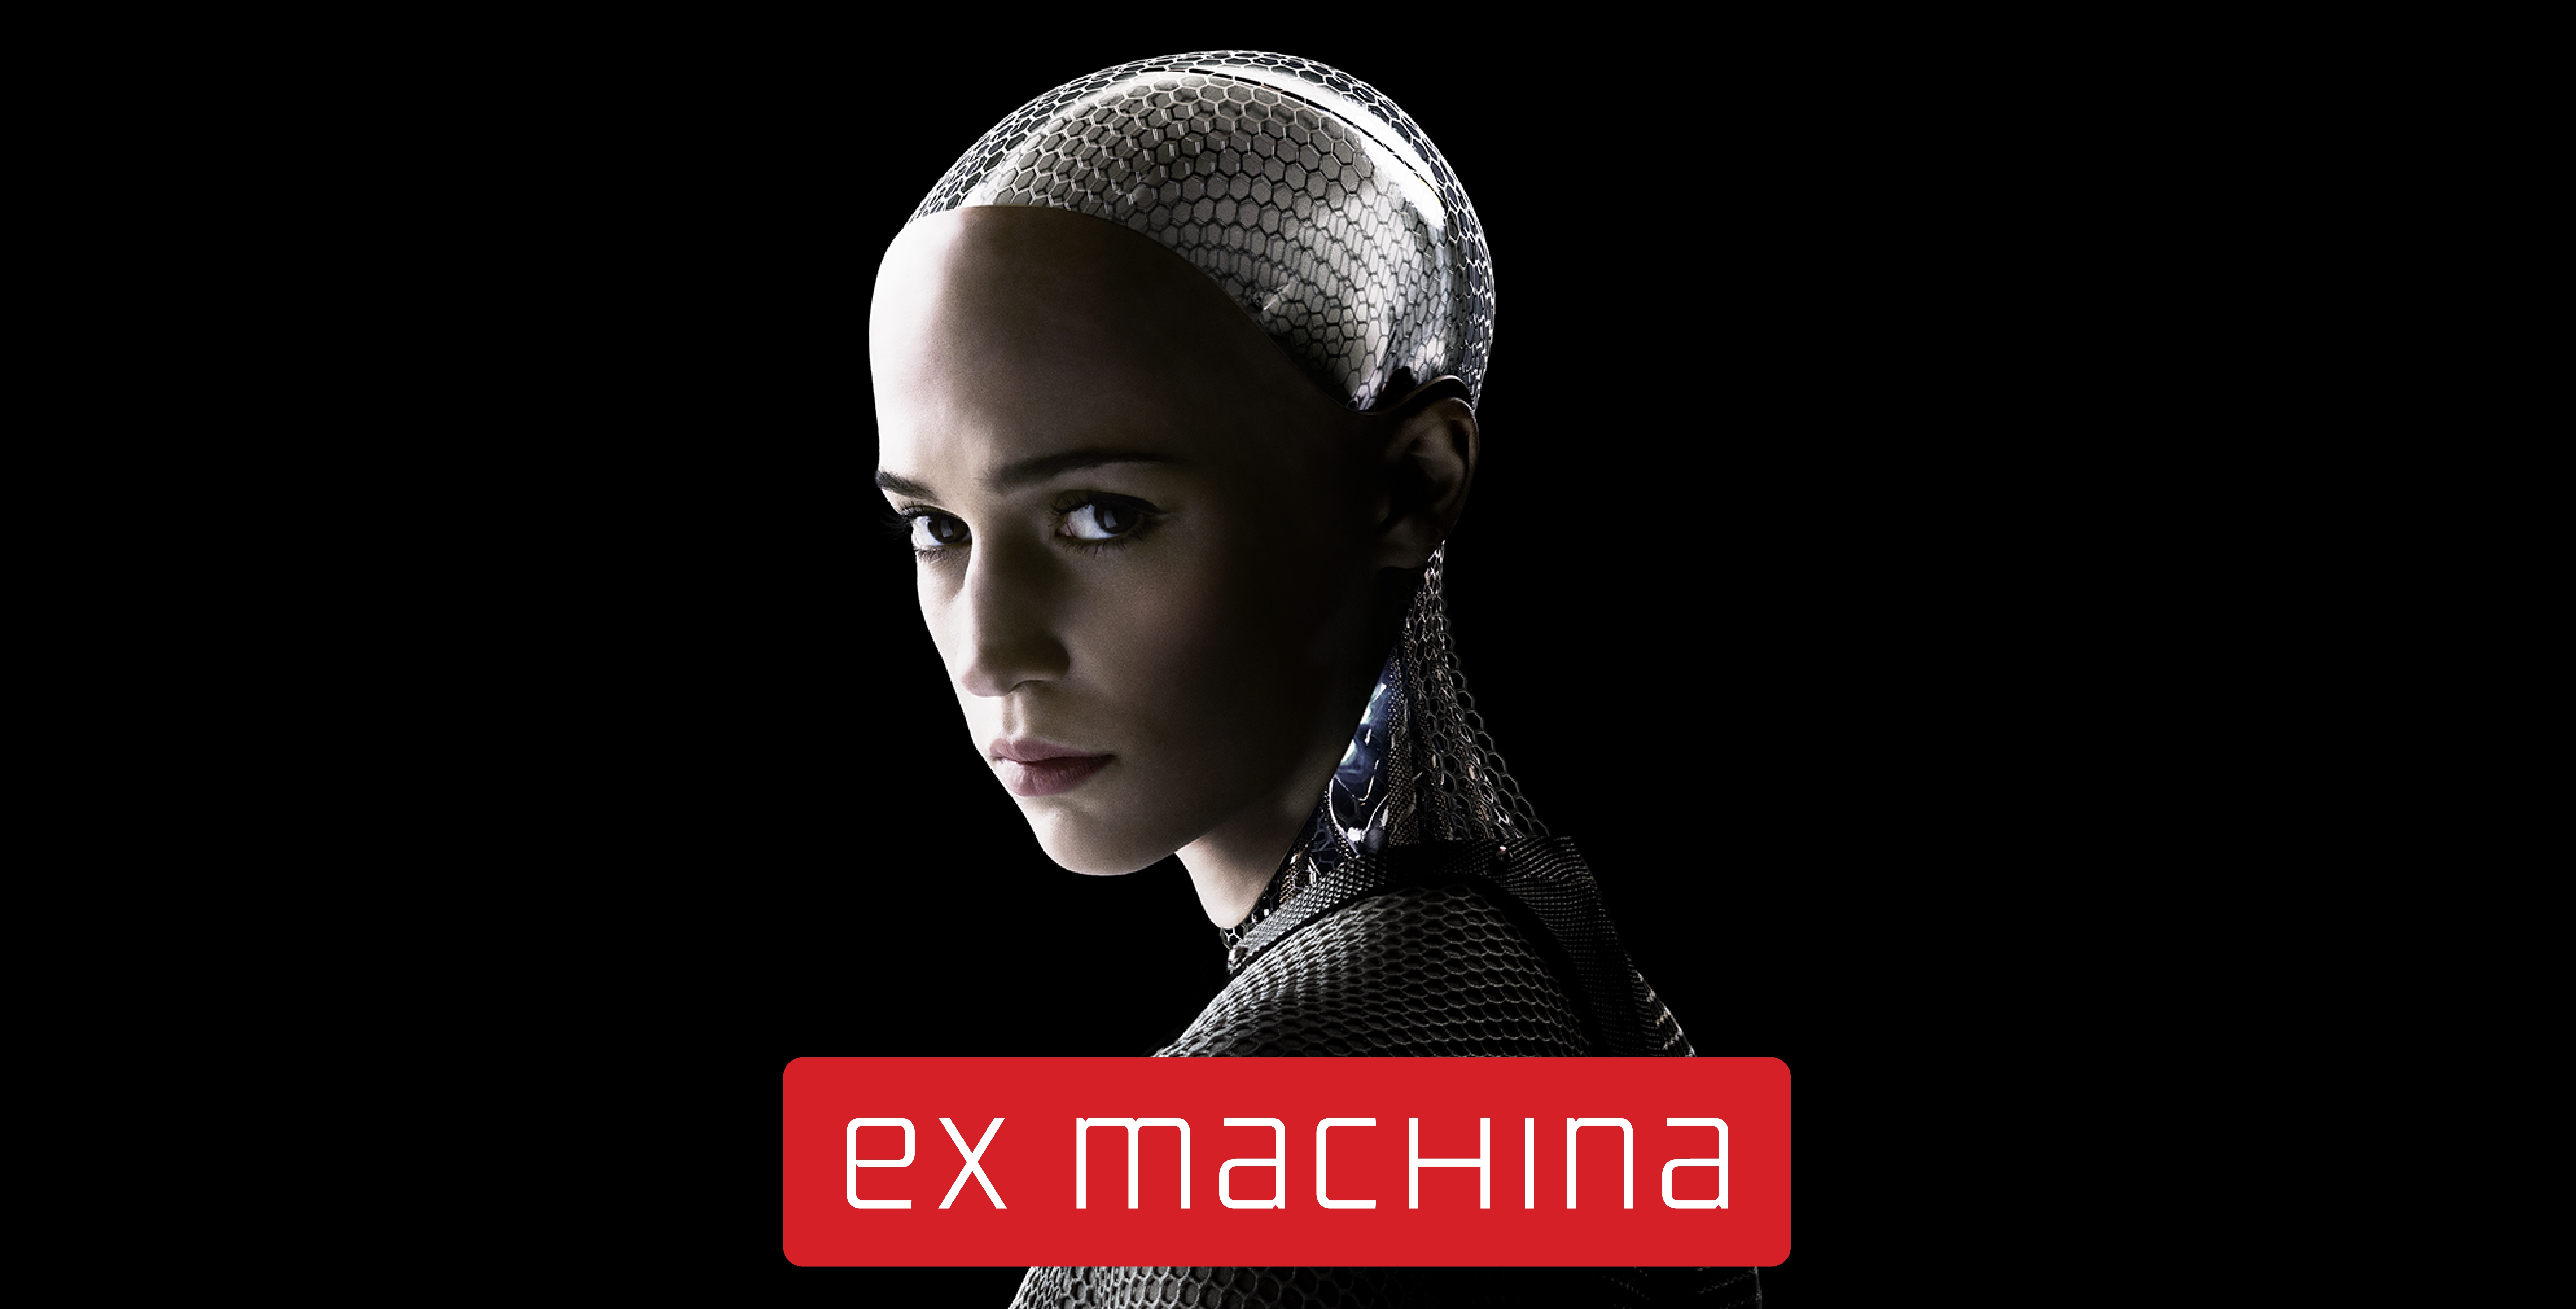 31-facts-about-the-movie-ex-machina